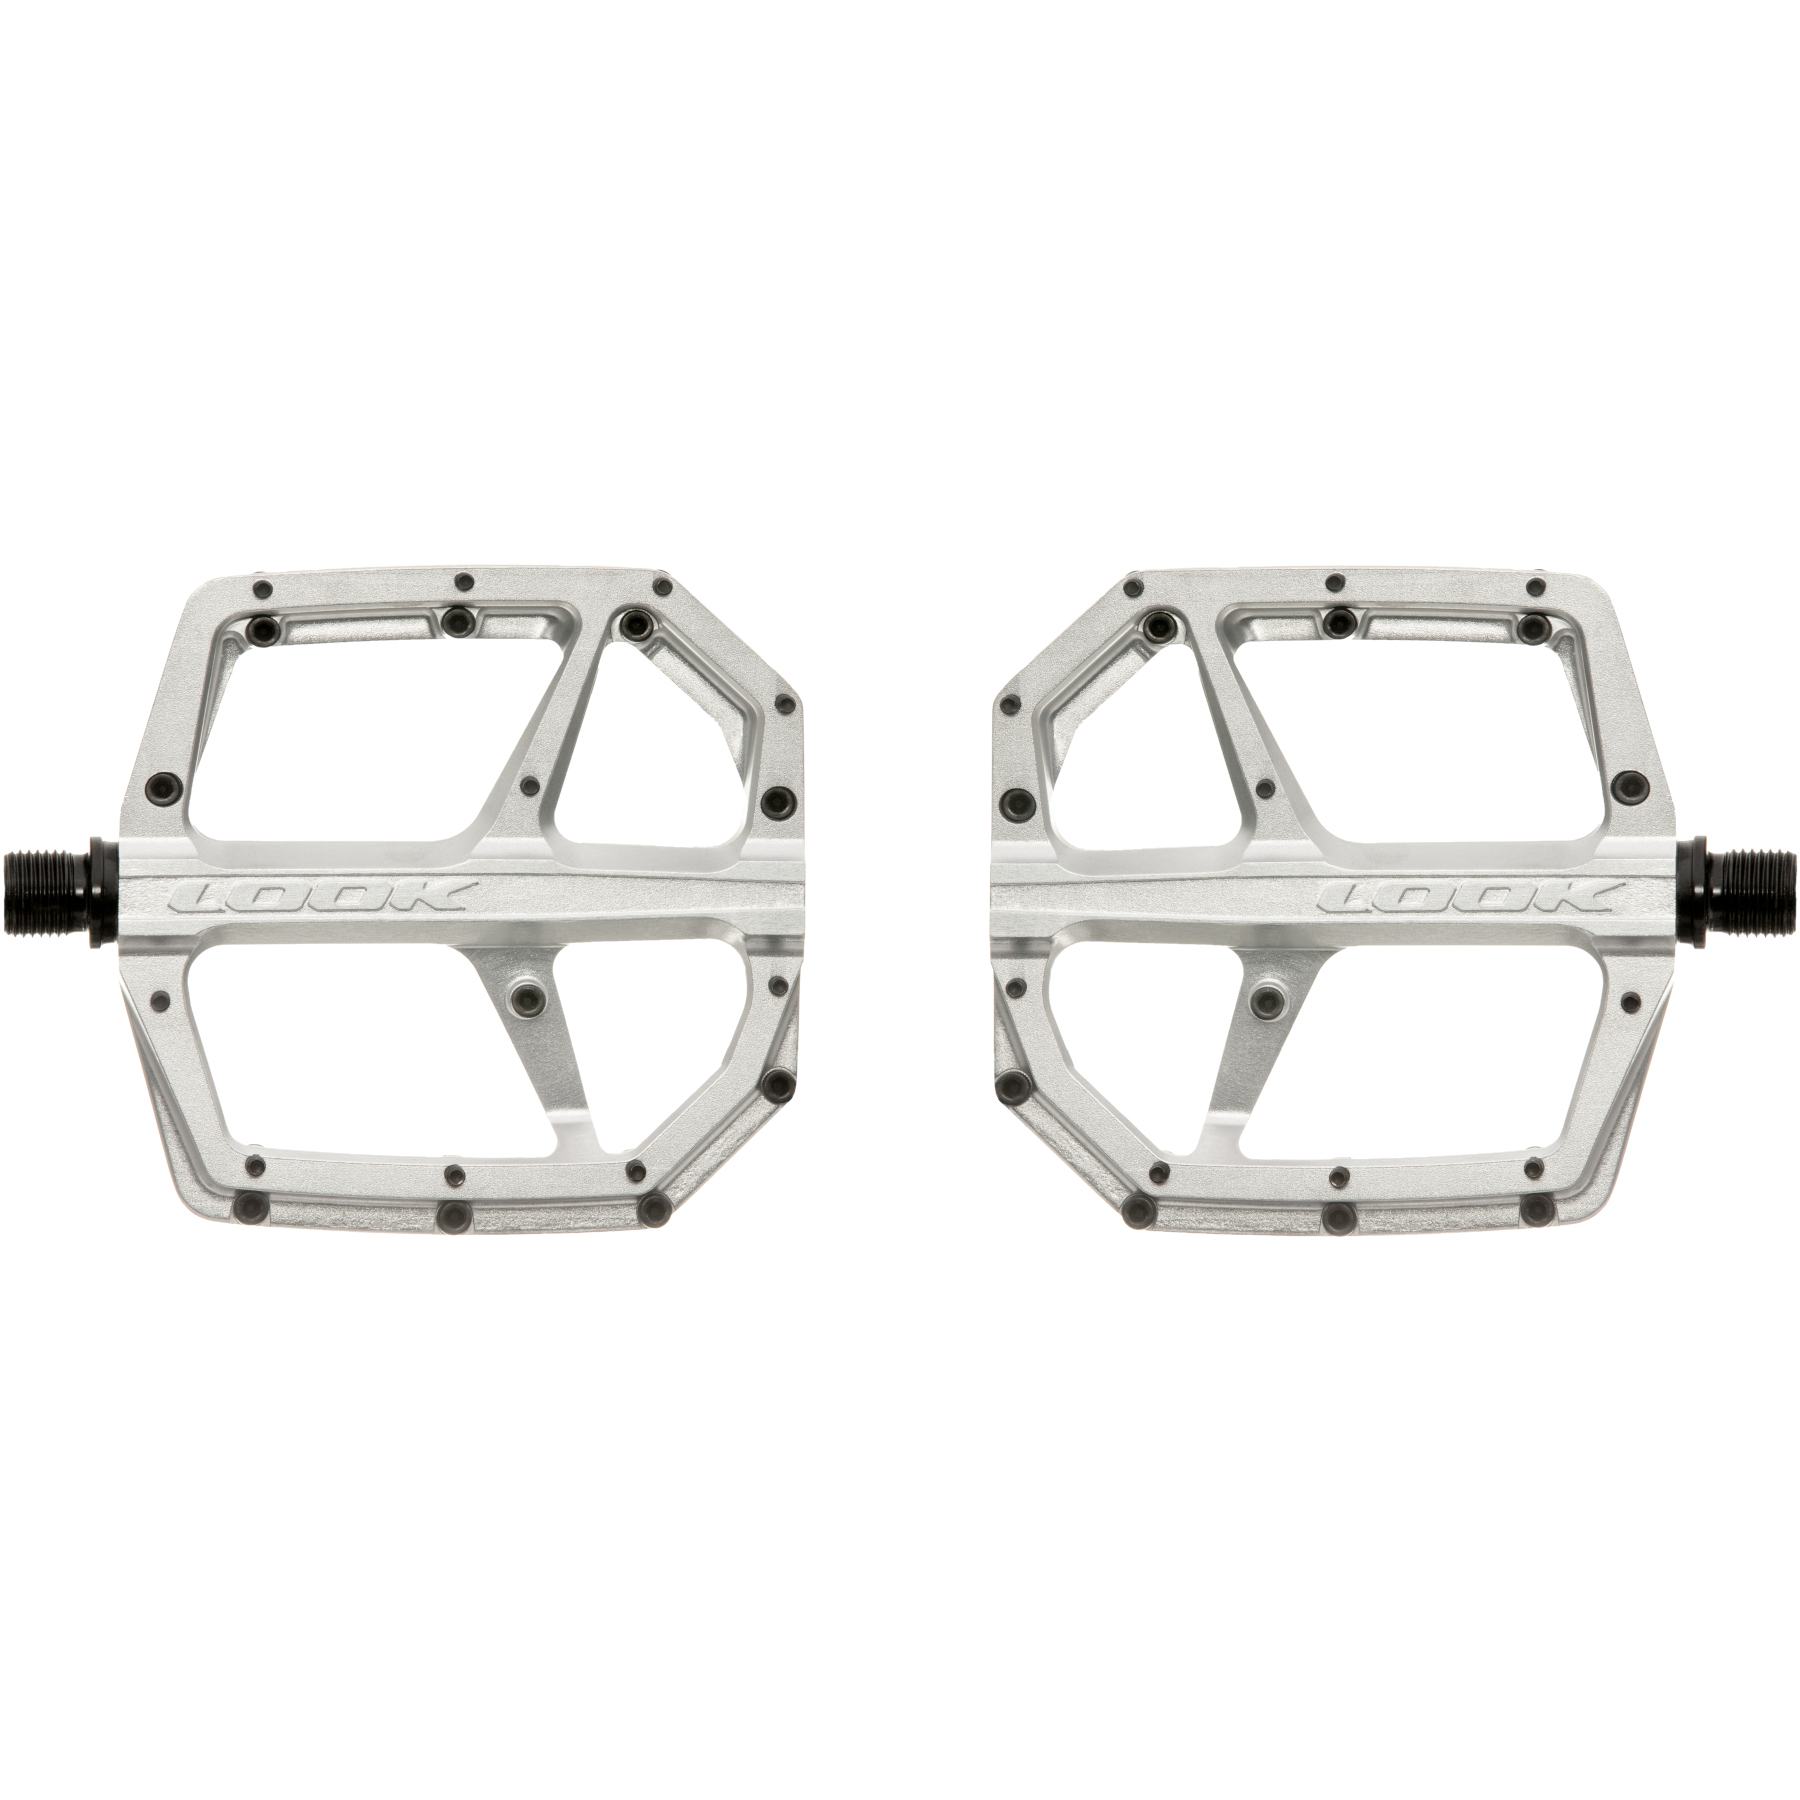 Picture of LOOK Trail Roc Plus MTB Flat Pedals - silver